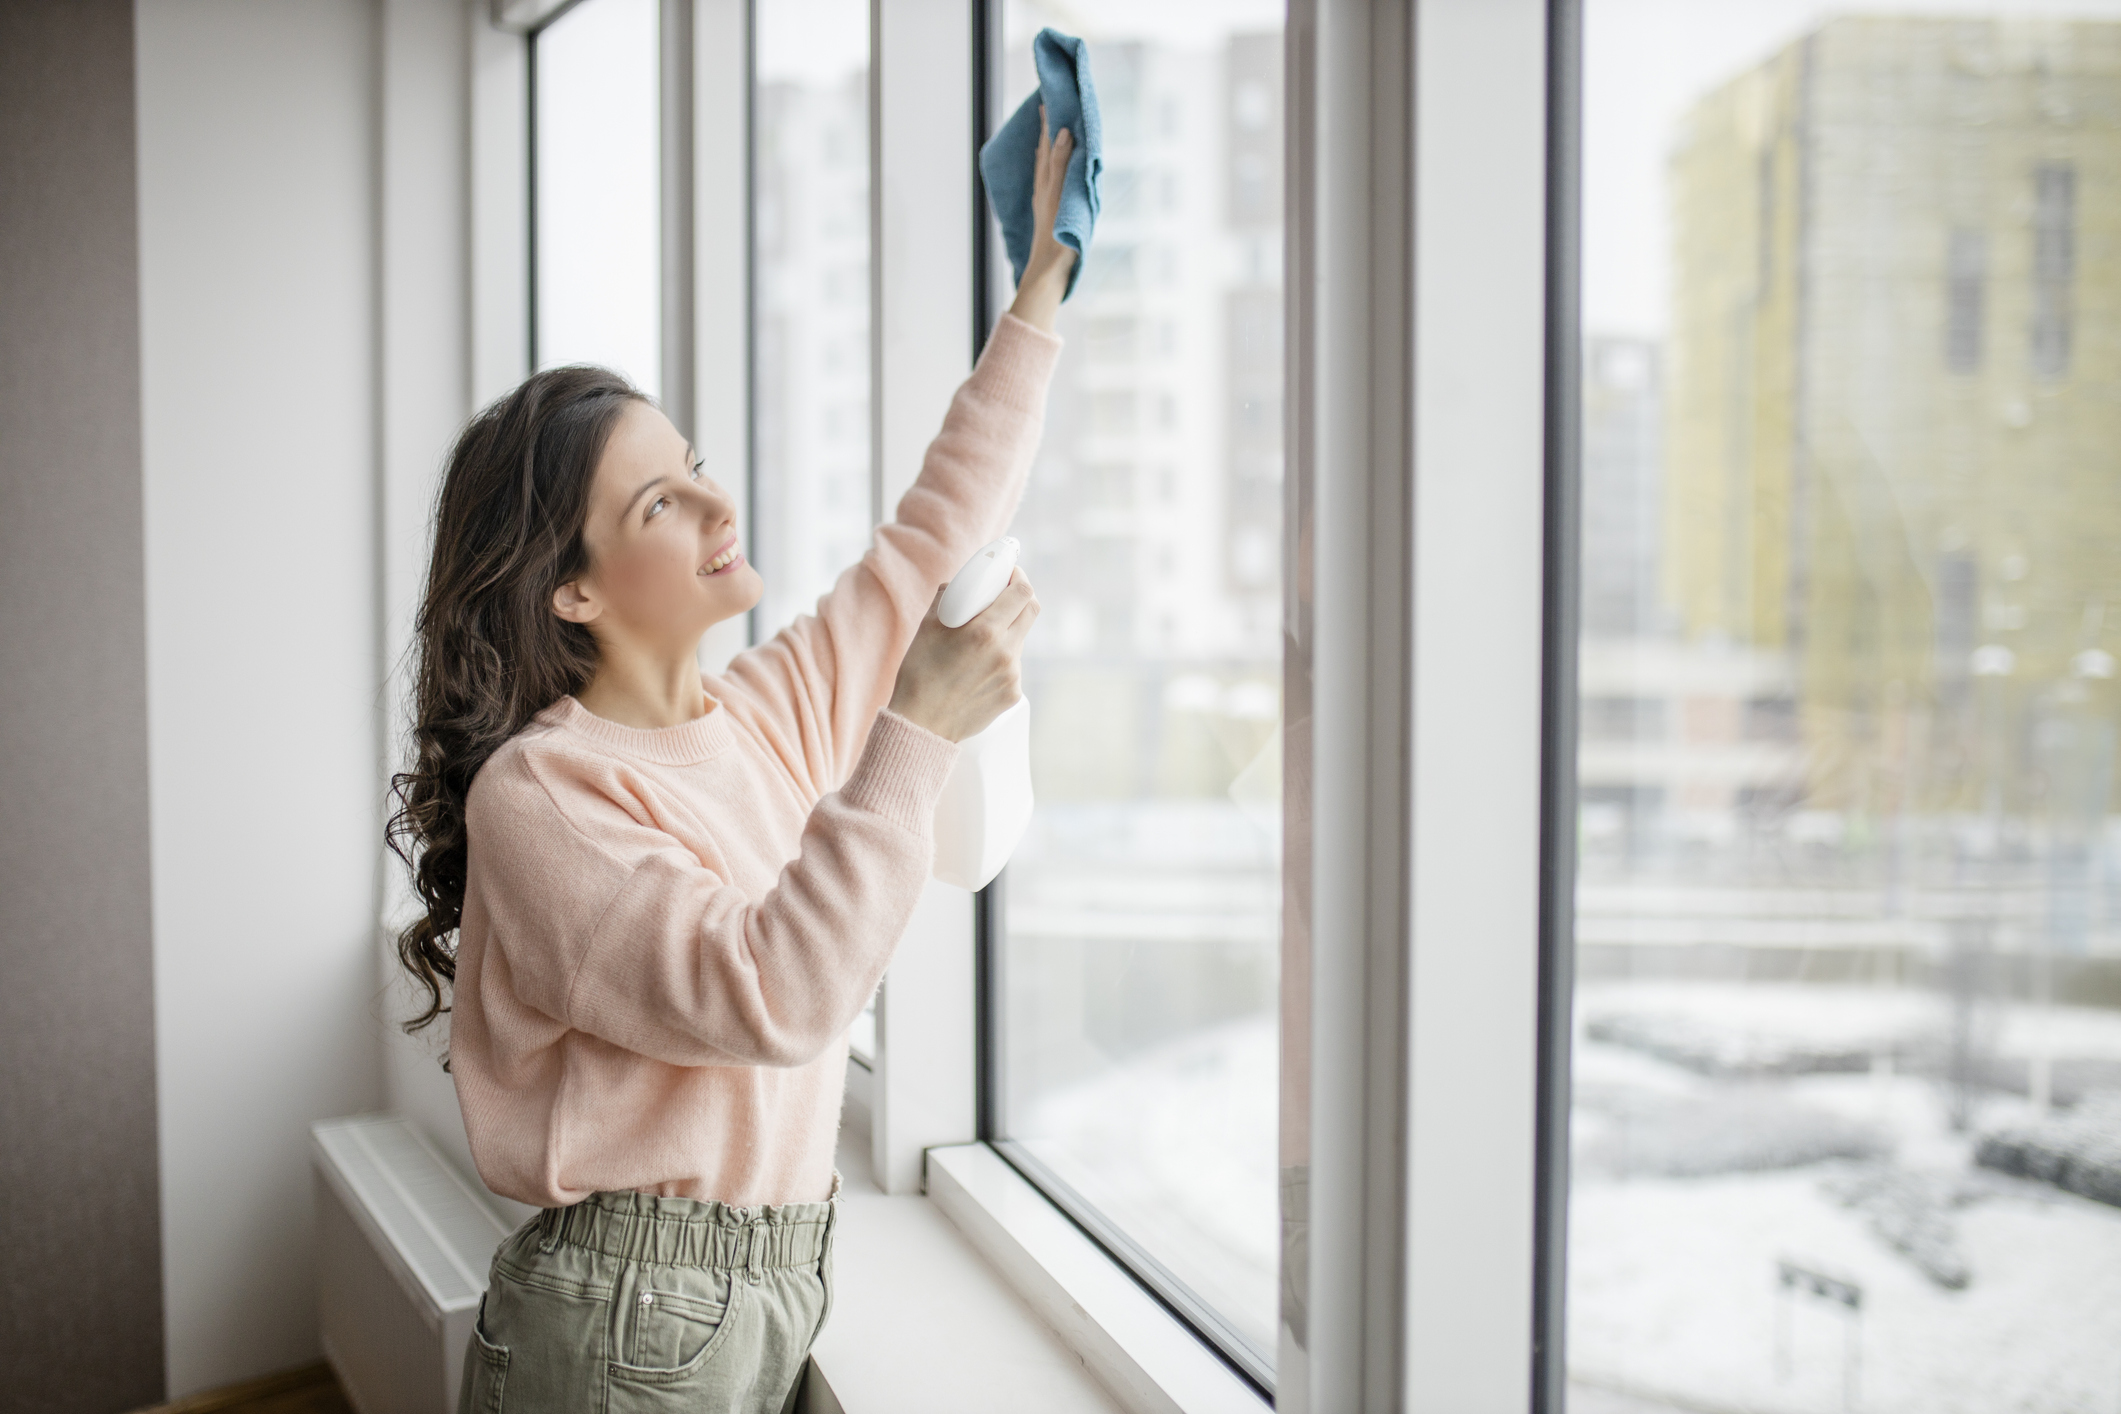 How to Clean Windows in Cold Weather